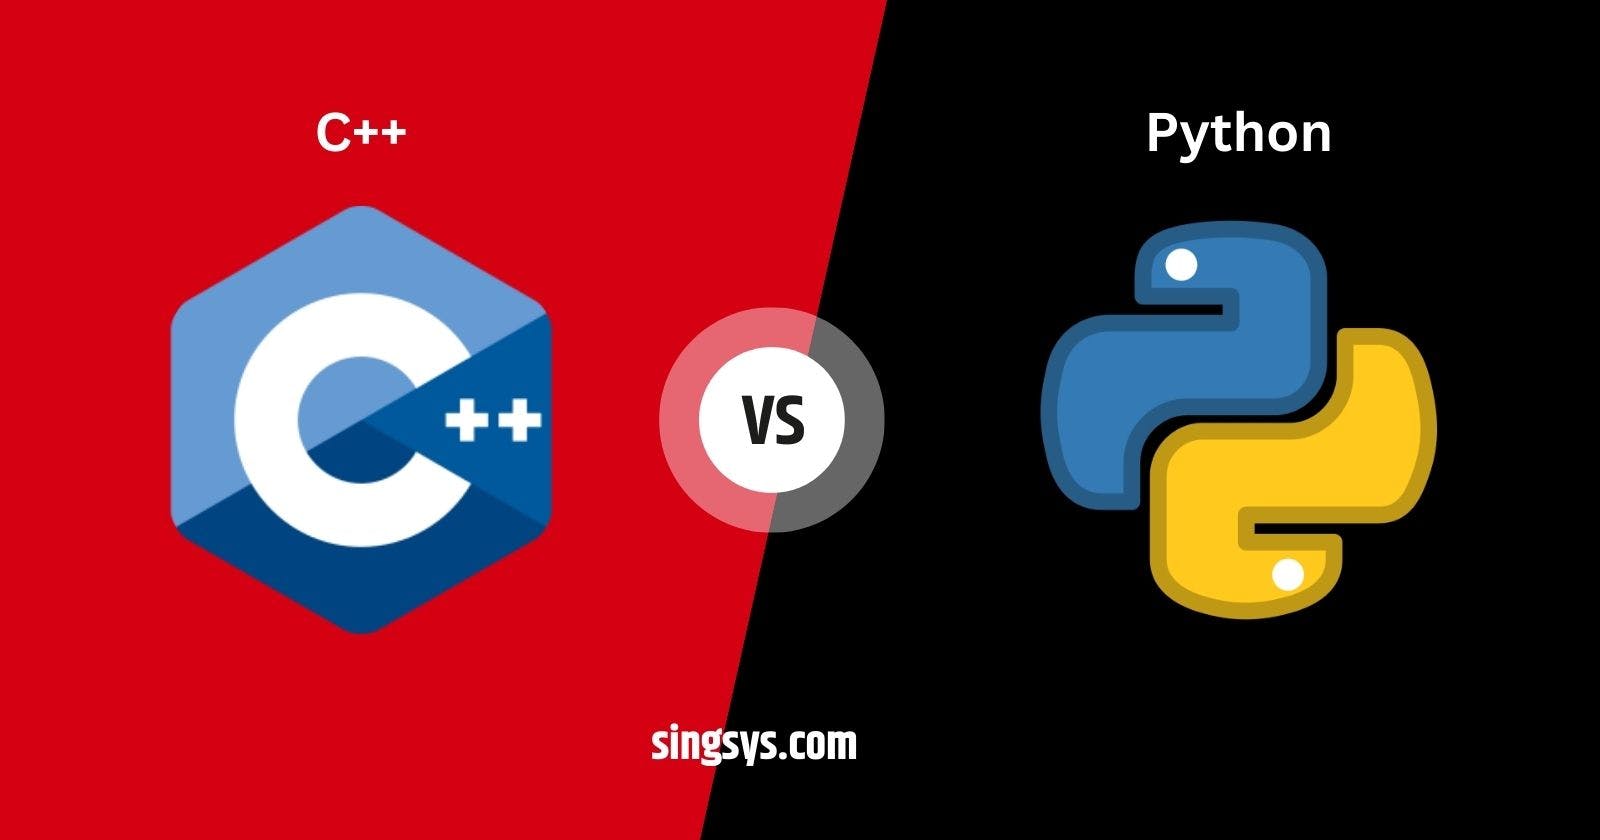 Python or C++: Which is better for web development?